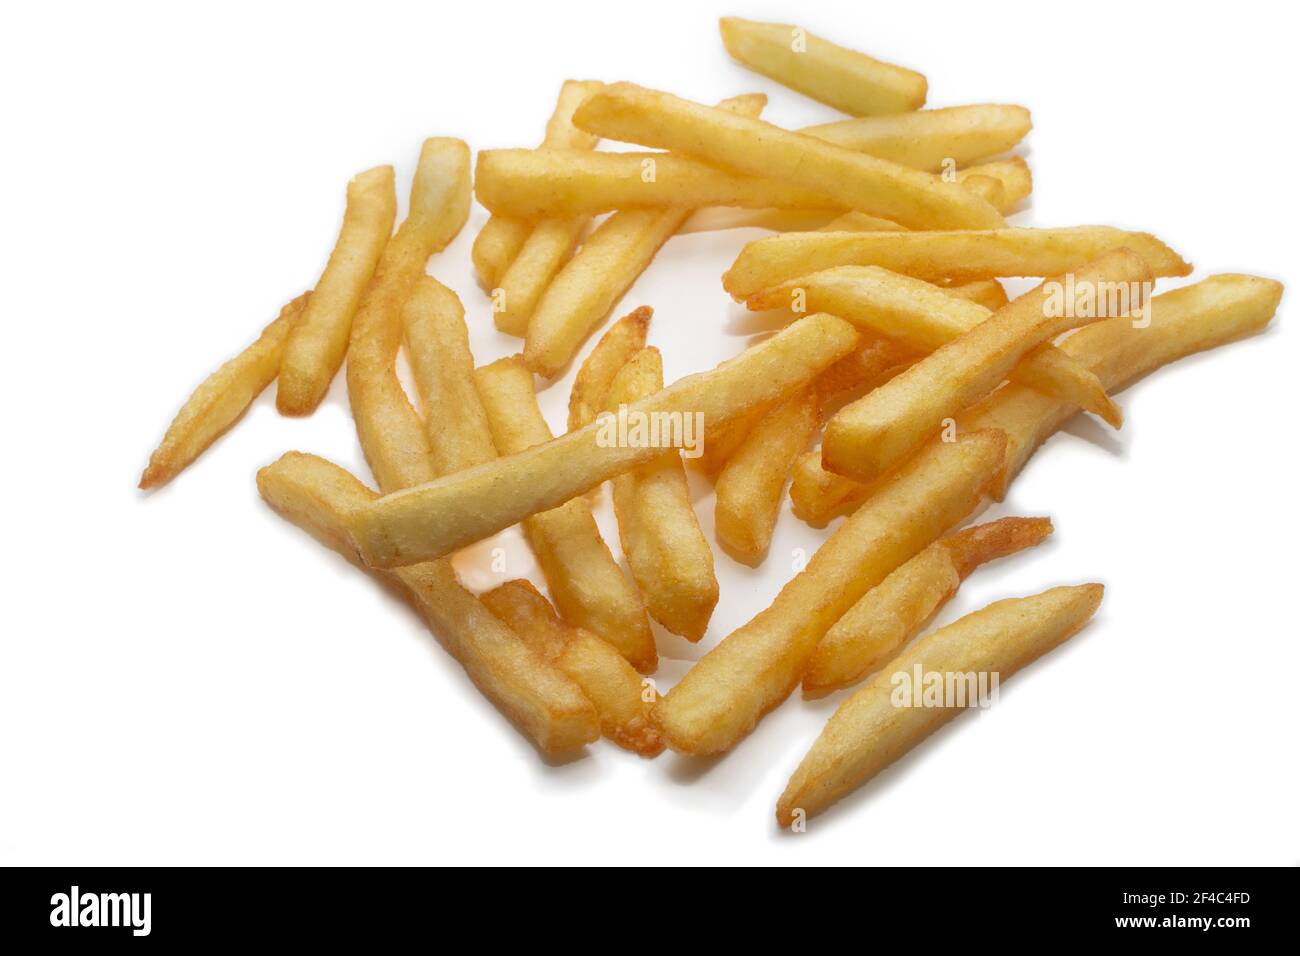 some french fries isolated on a white background Stock Photo